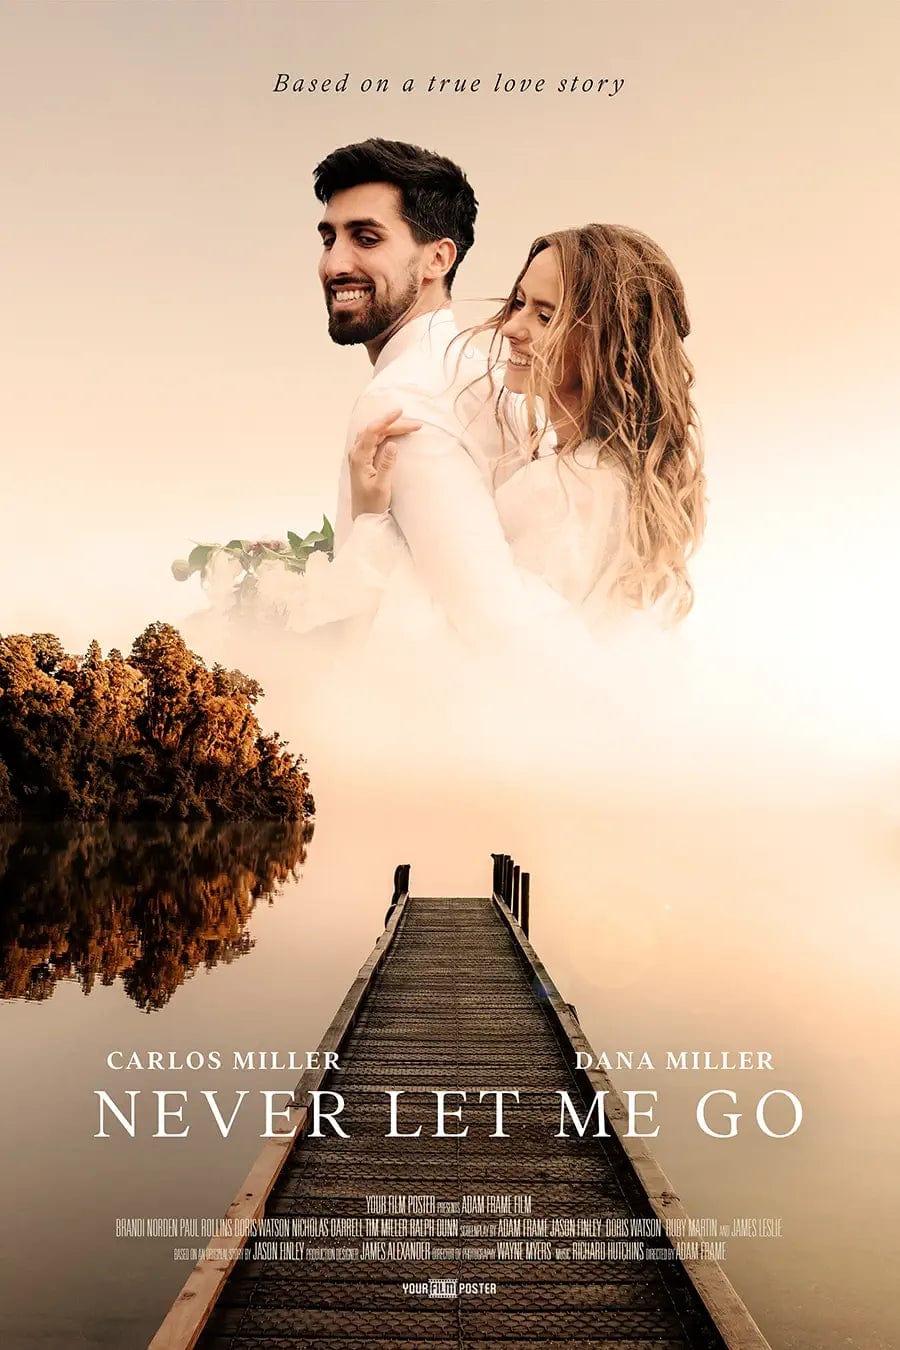 Romantic personalizable movie poster, set on a romantic pier, showing a newly wed couple